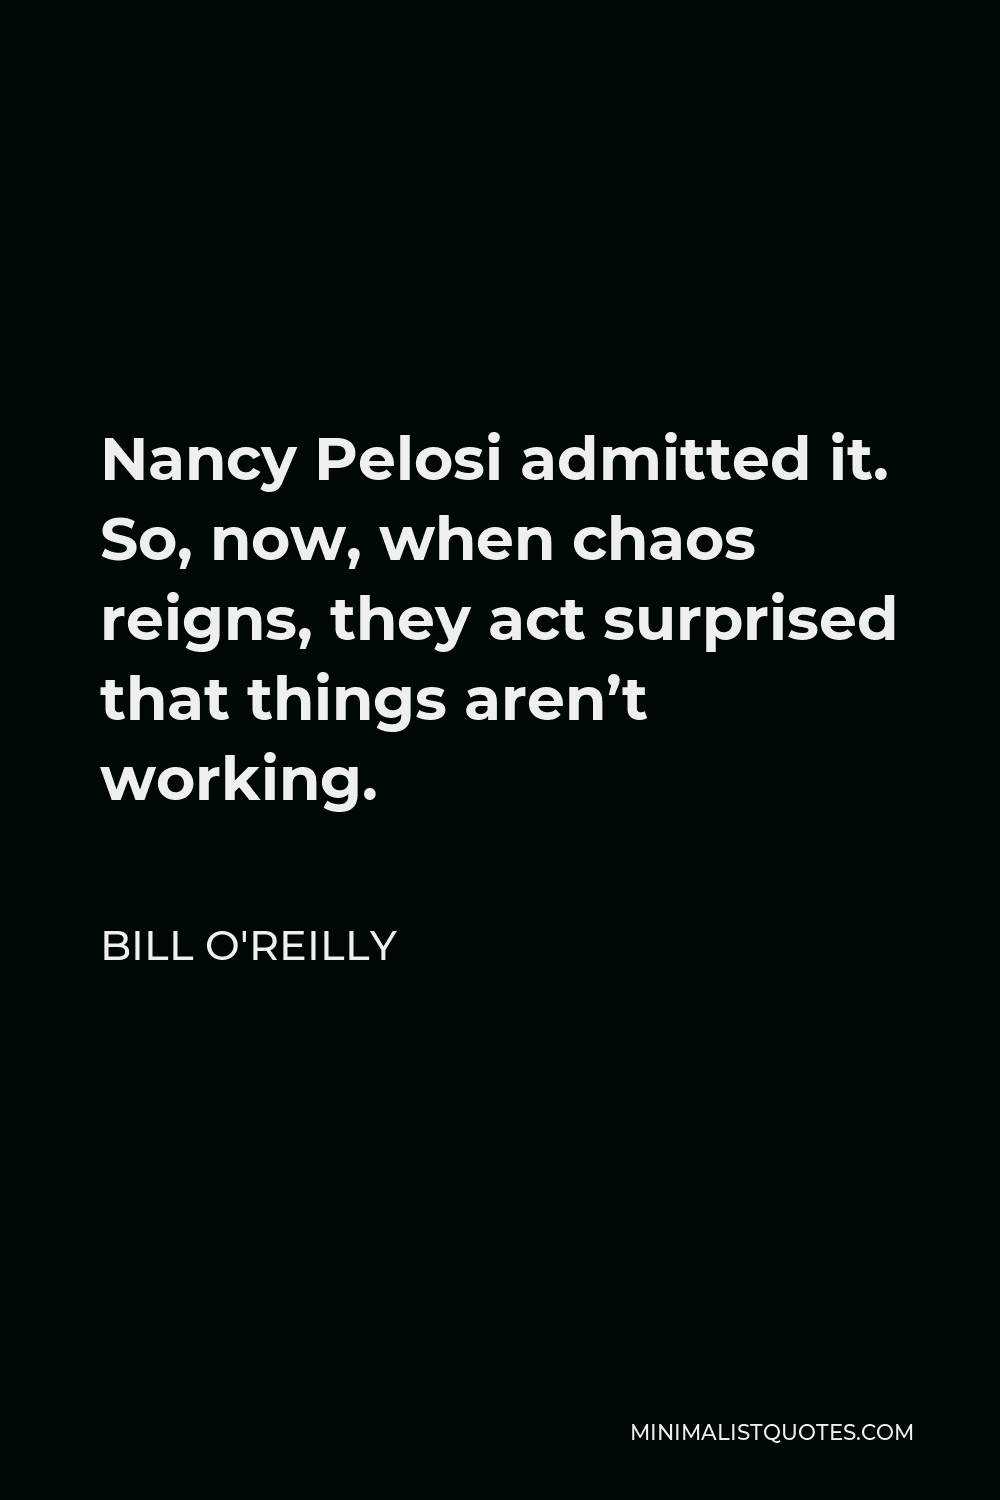 Bill O'Reilly Quote - Nancy Pelosi admitted it. So, now, when chaos reigns, they act surprised that things aren’t working.